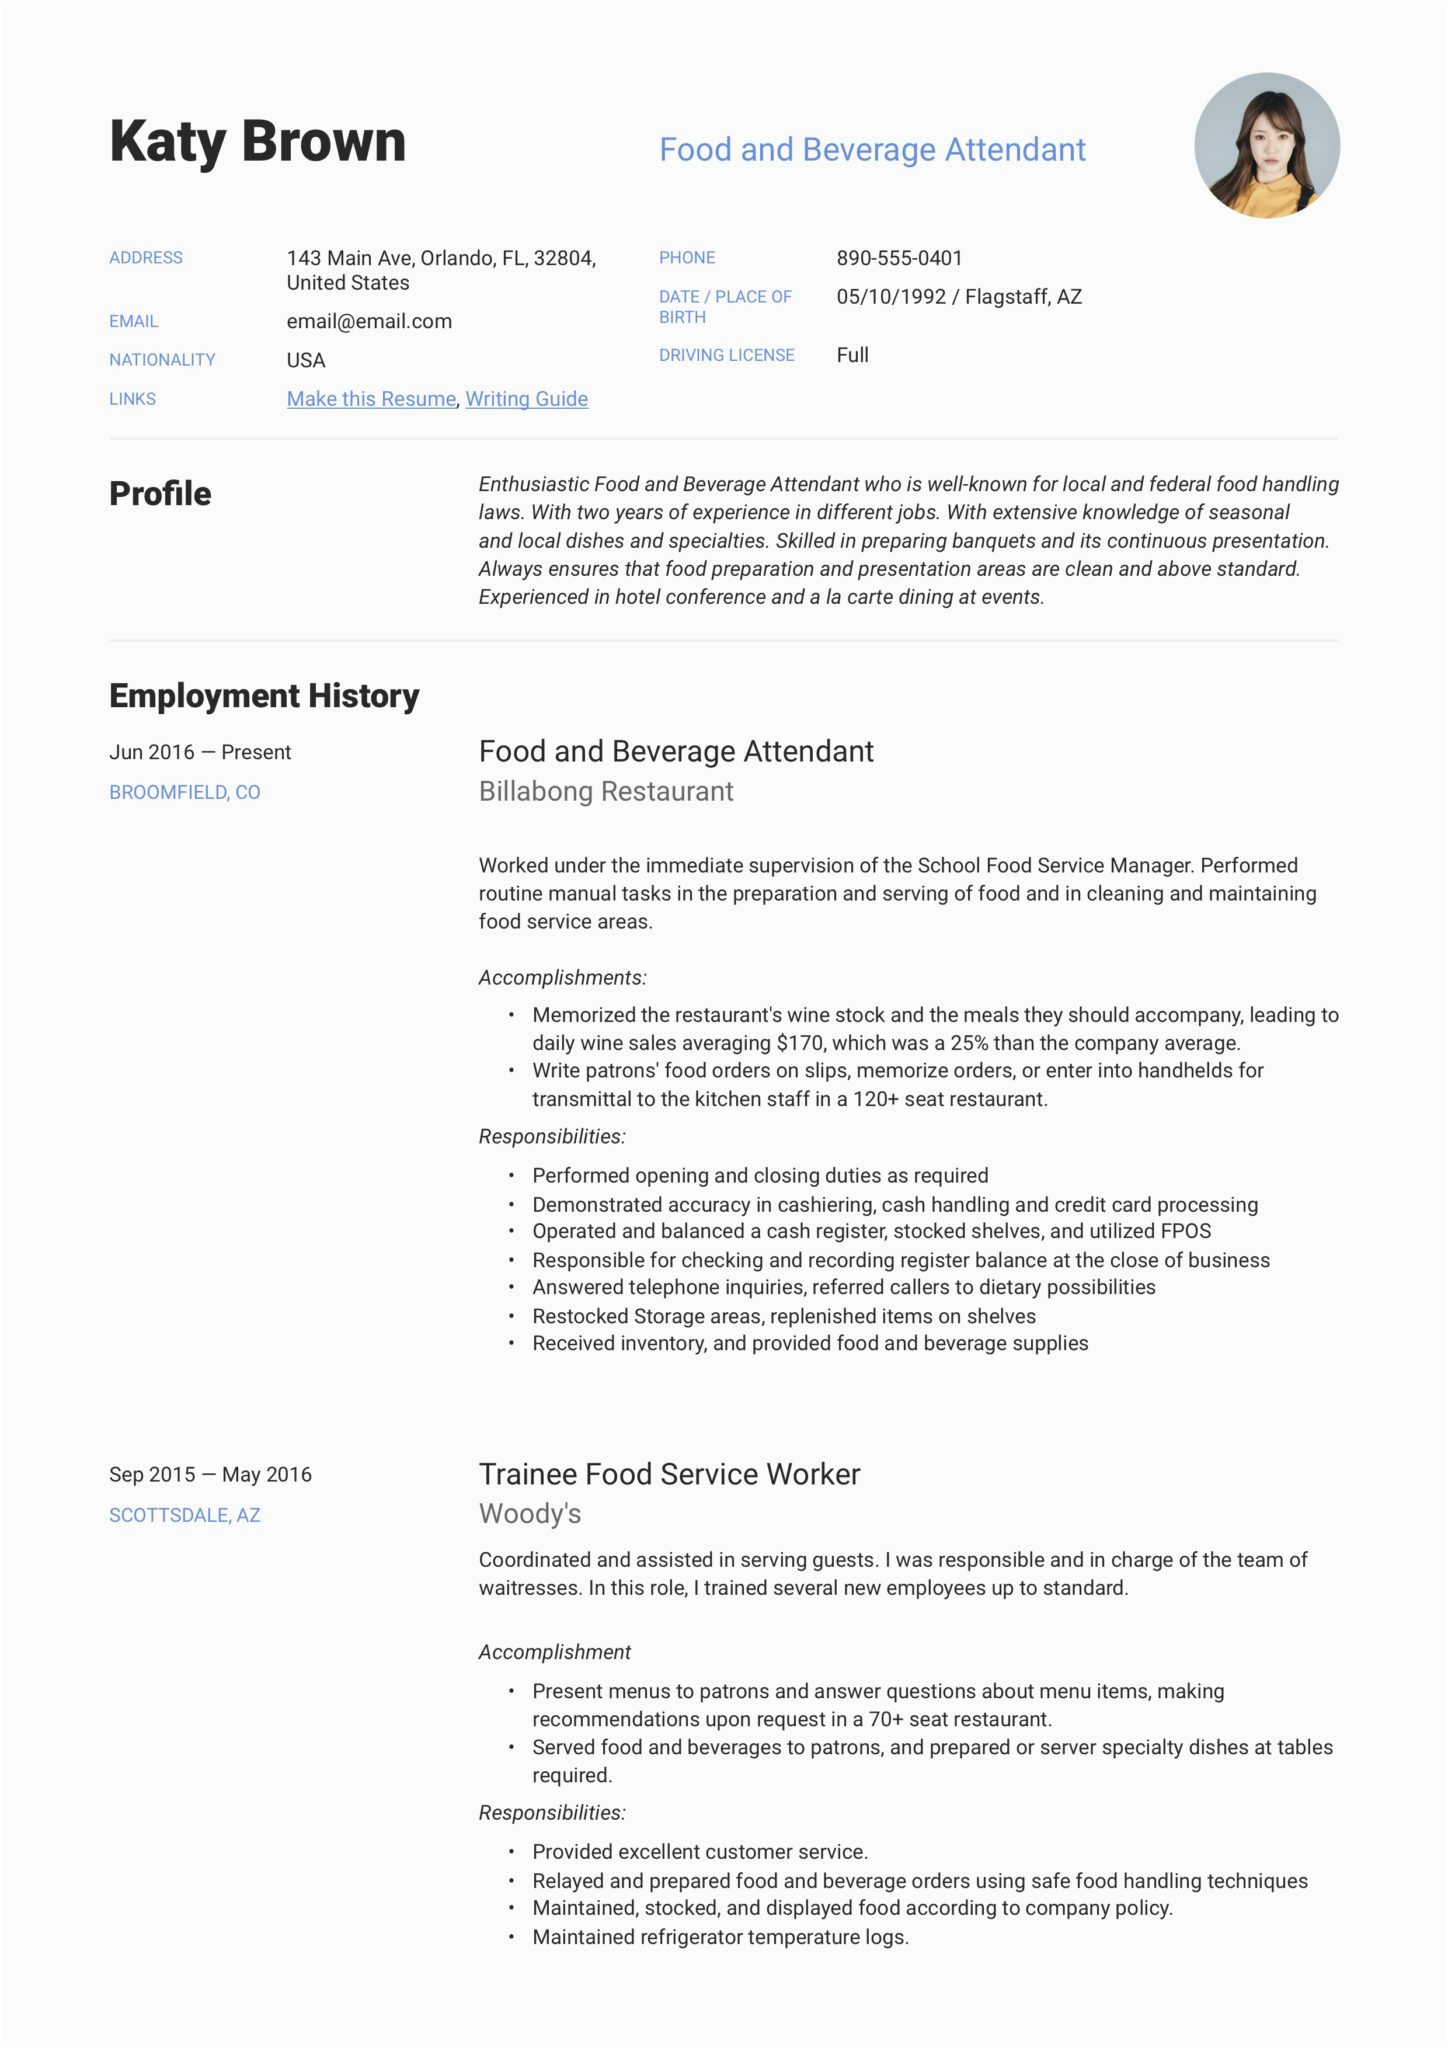 Free Sample Of A Resume Food and Beveage 22 Food and Beverage attendant Resume Examples Word & Pdf